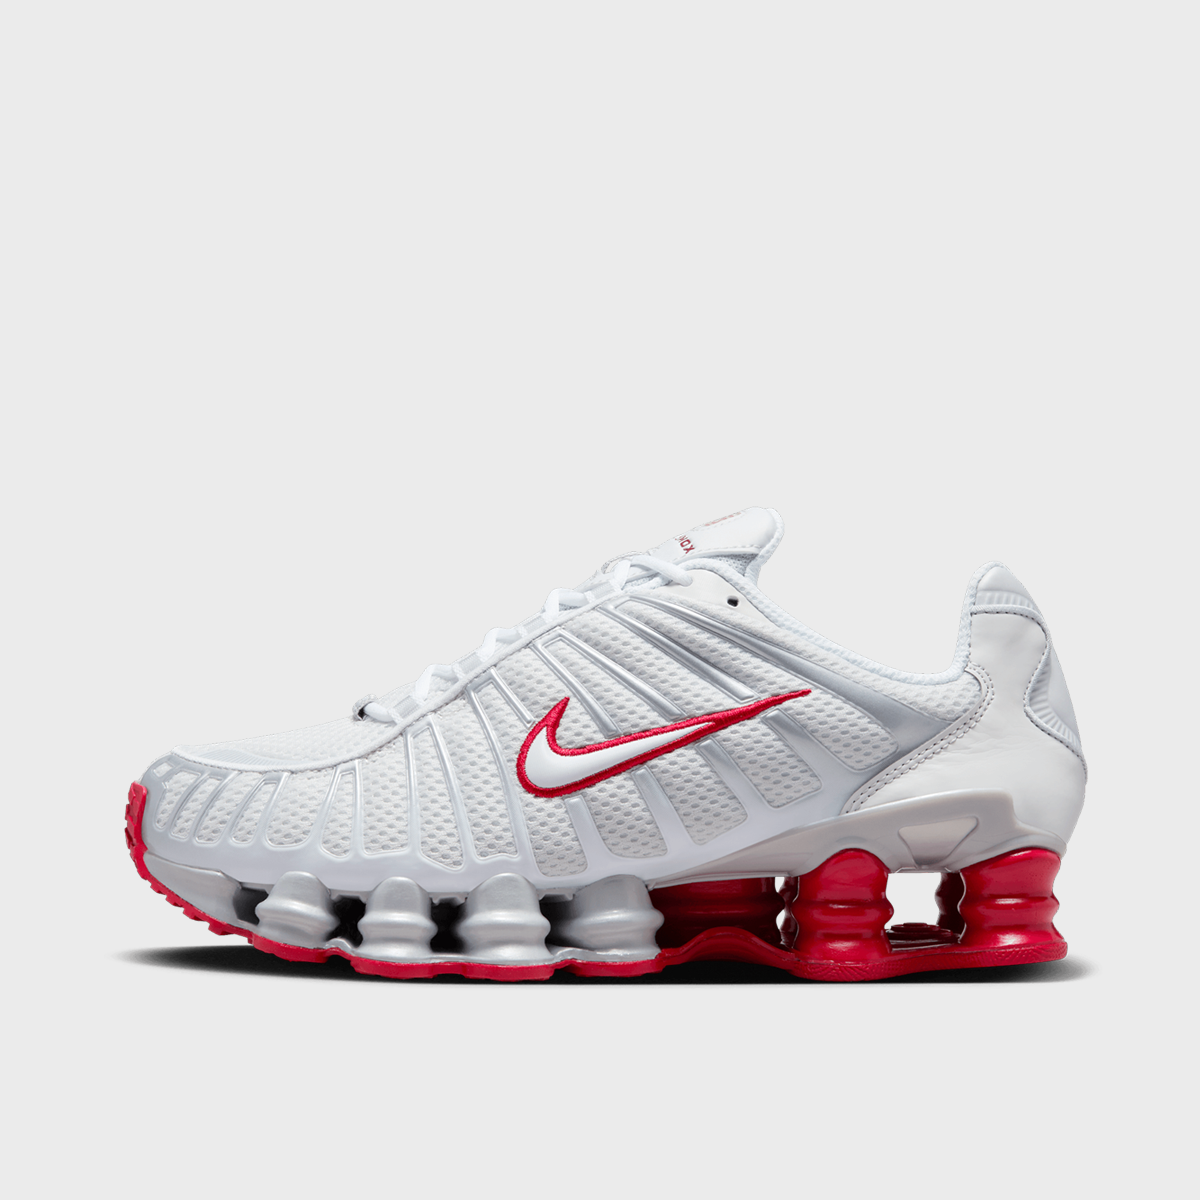 WMNS Shox TL, NIKE, Footwear, platinum tint/white/gym red, taille: 36.5